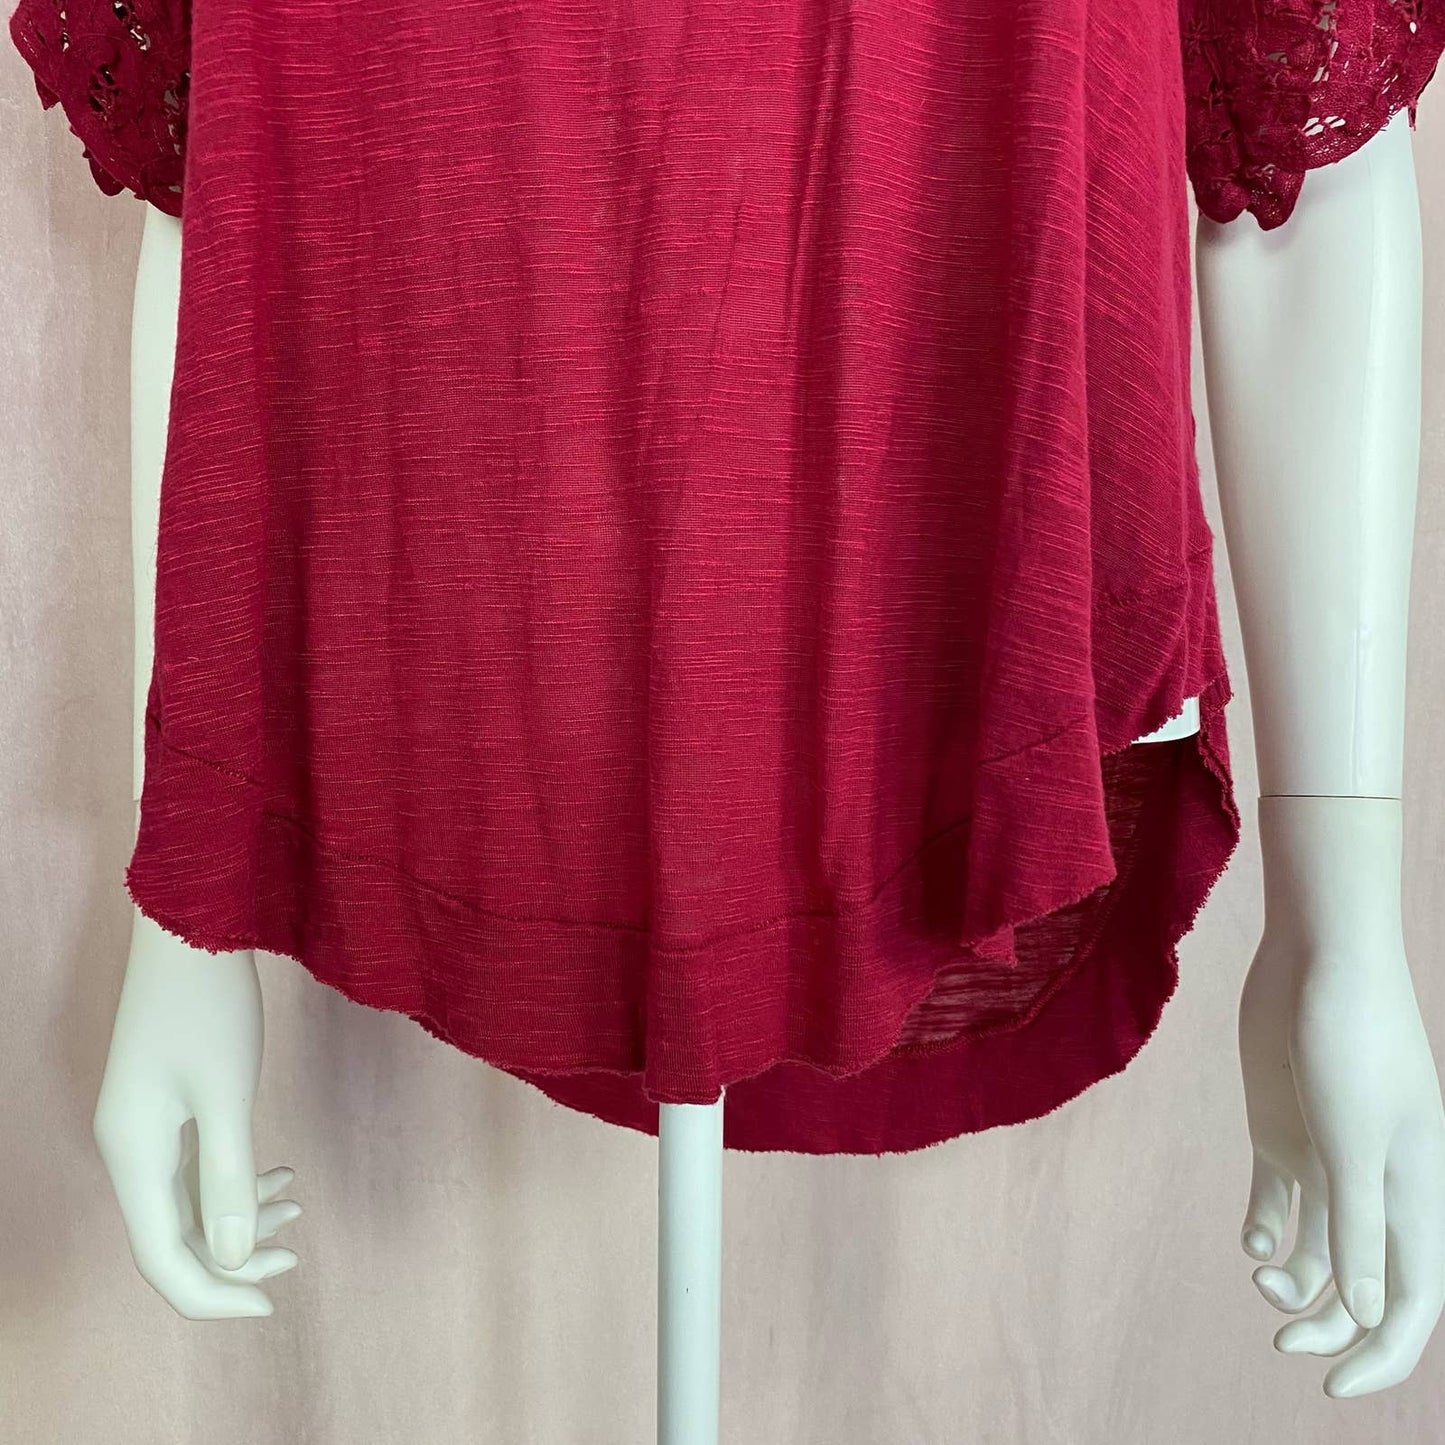 Secondhand Free People Lace Sleeve Knit Top, Size XS